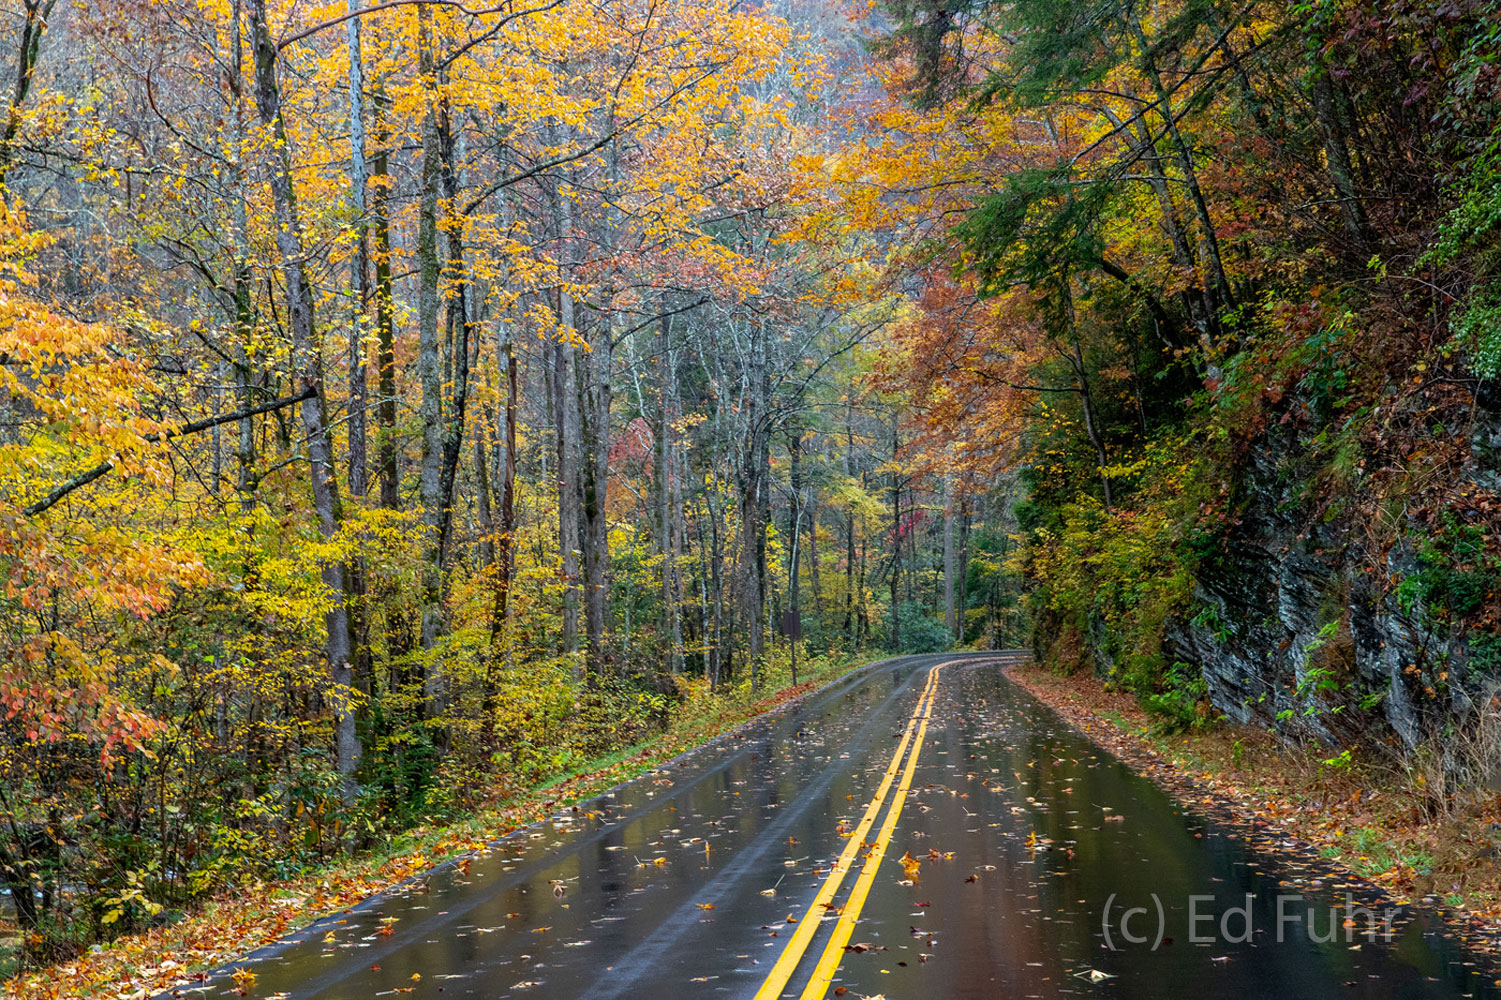 Laurel Creek Road reflects autumn's colors after an afternoon rain.